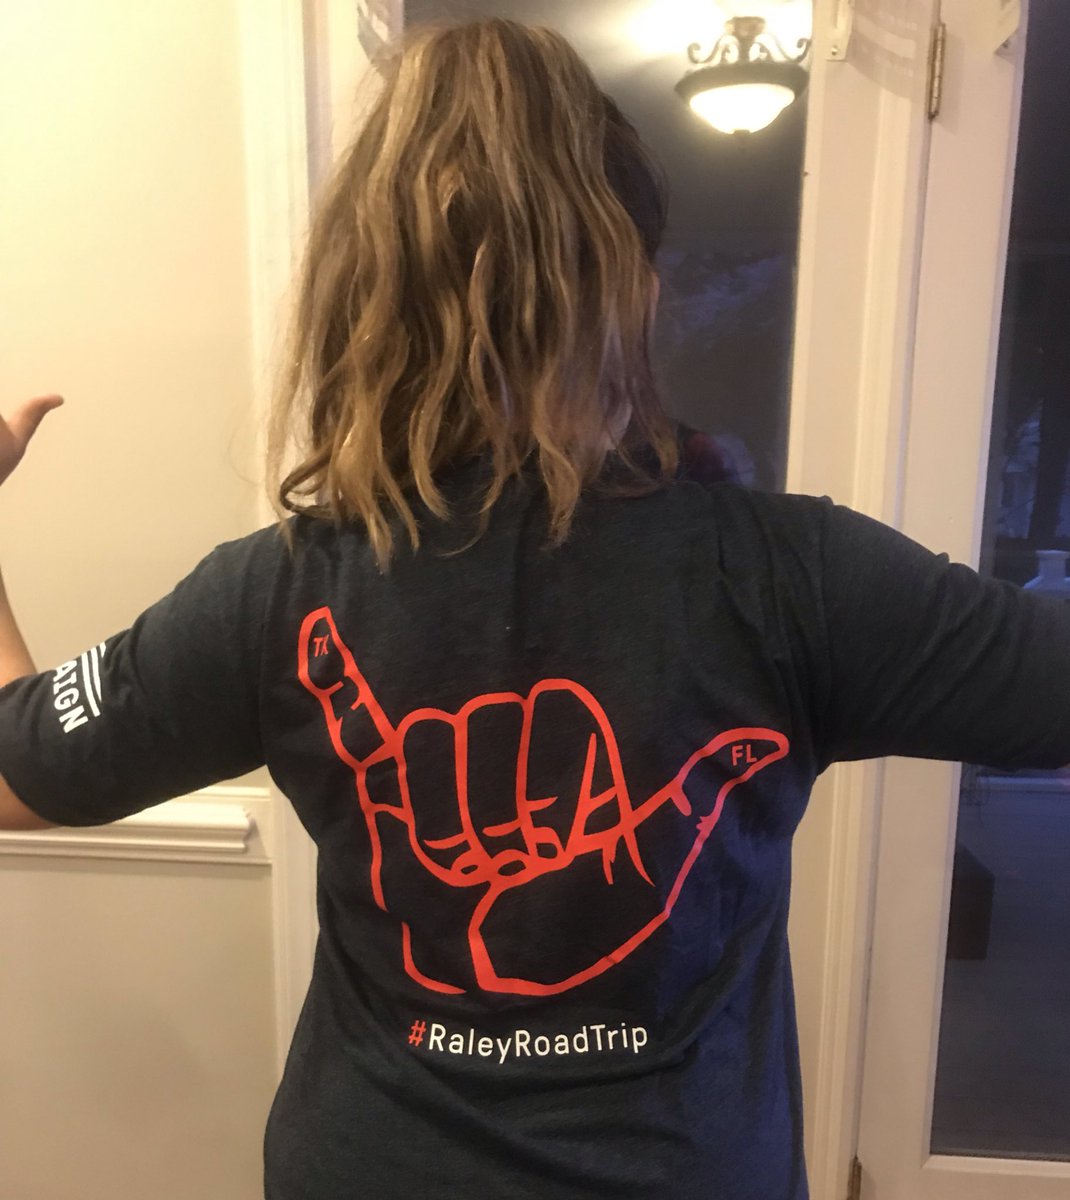 Go show some support!  Get your shirts and help out @BootCampaign during their #raleyroadtrip!  #SaturdayThoughts